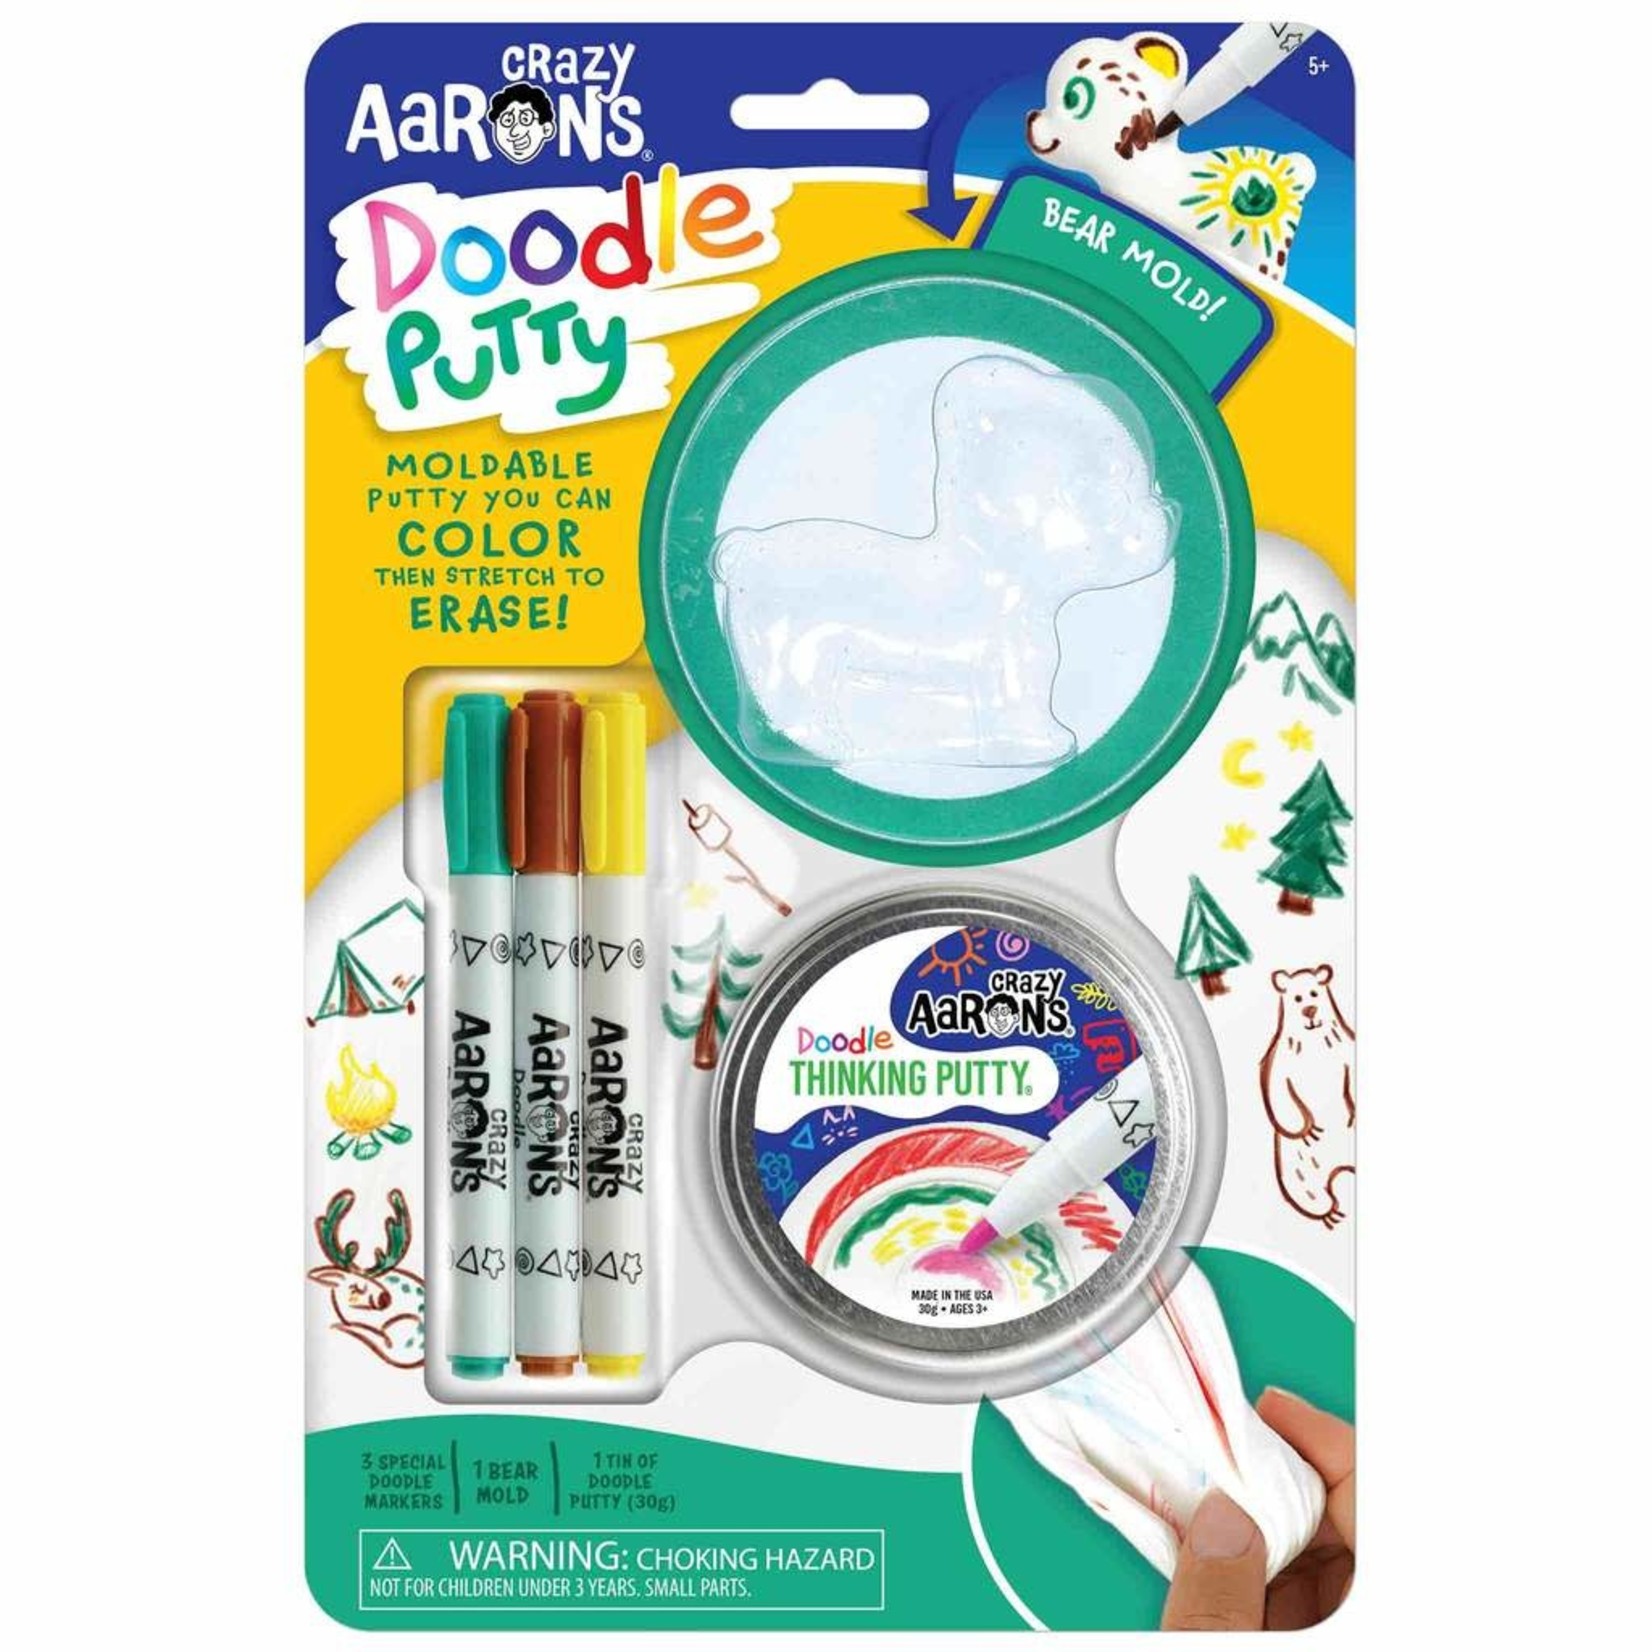 Crazy Aaron's Thinking Putty Bear Doodle Putty